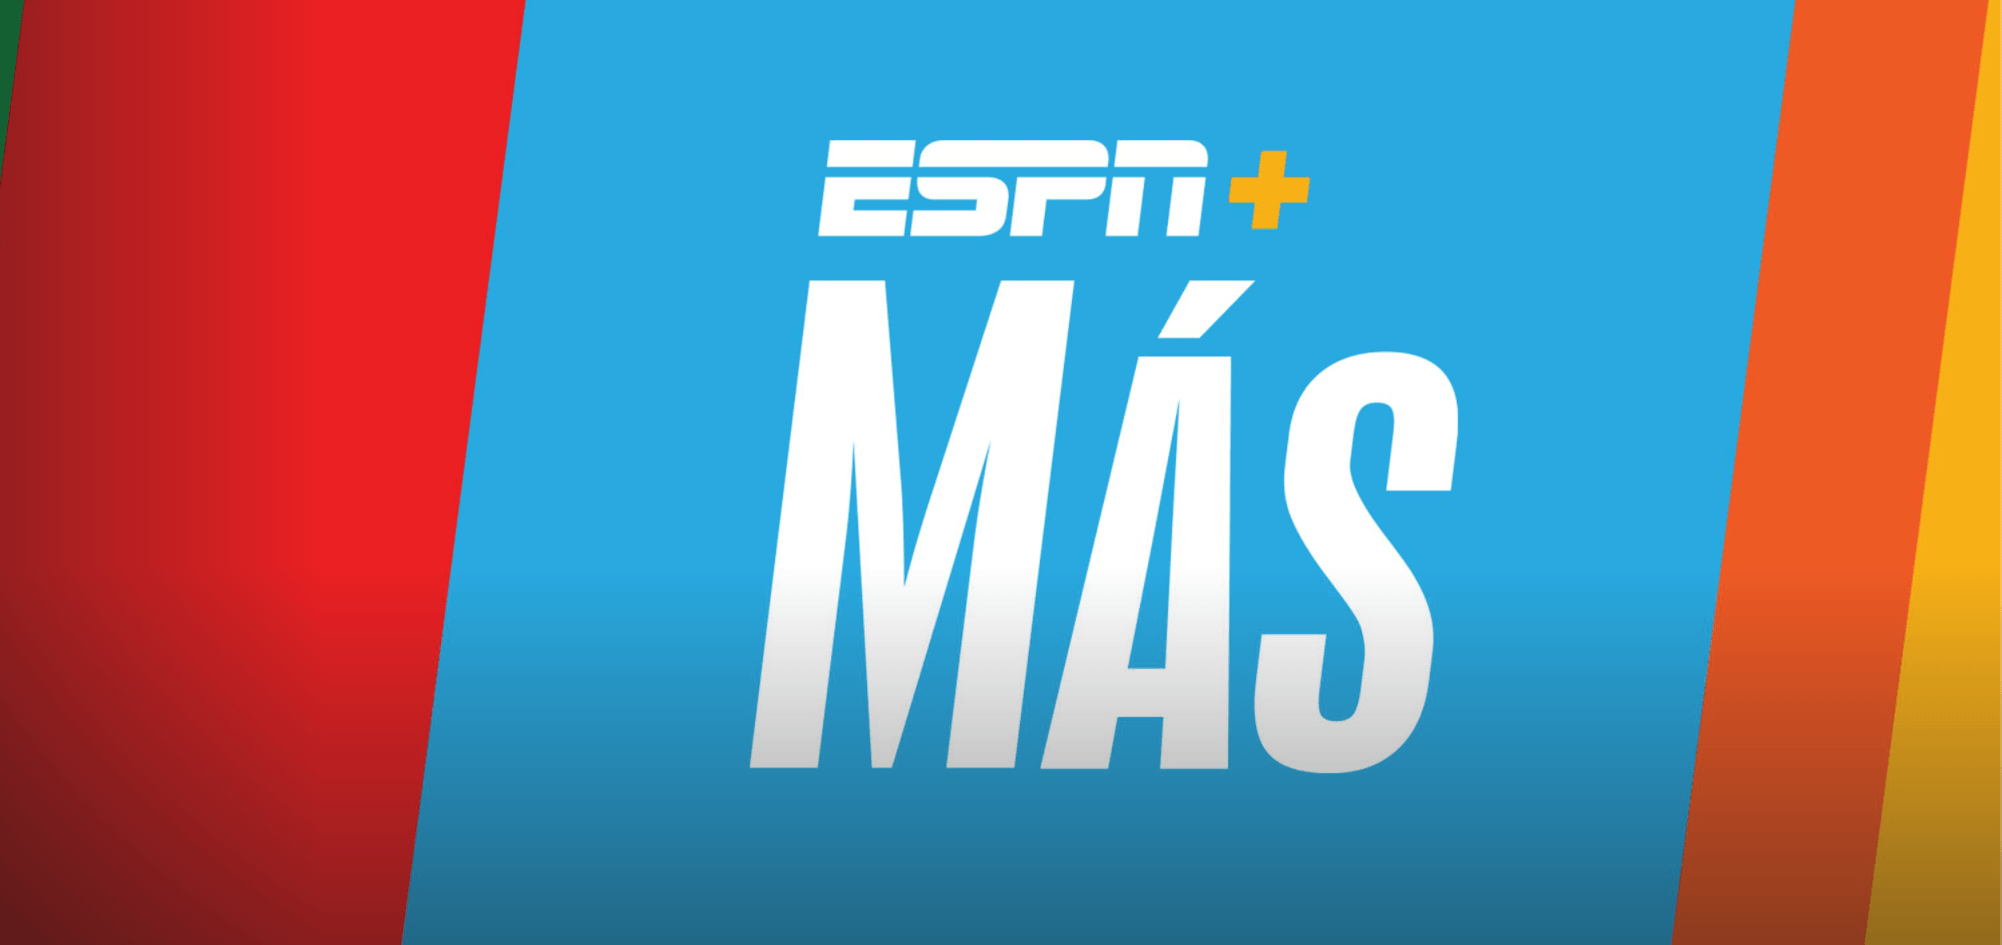 ESPN+ Adds New Permanent Section Dedicated to Hispanic and LatinX Athletes